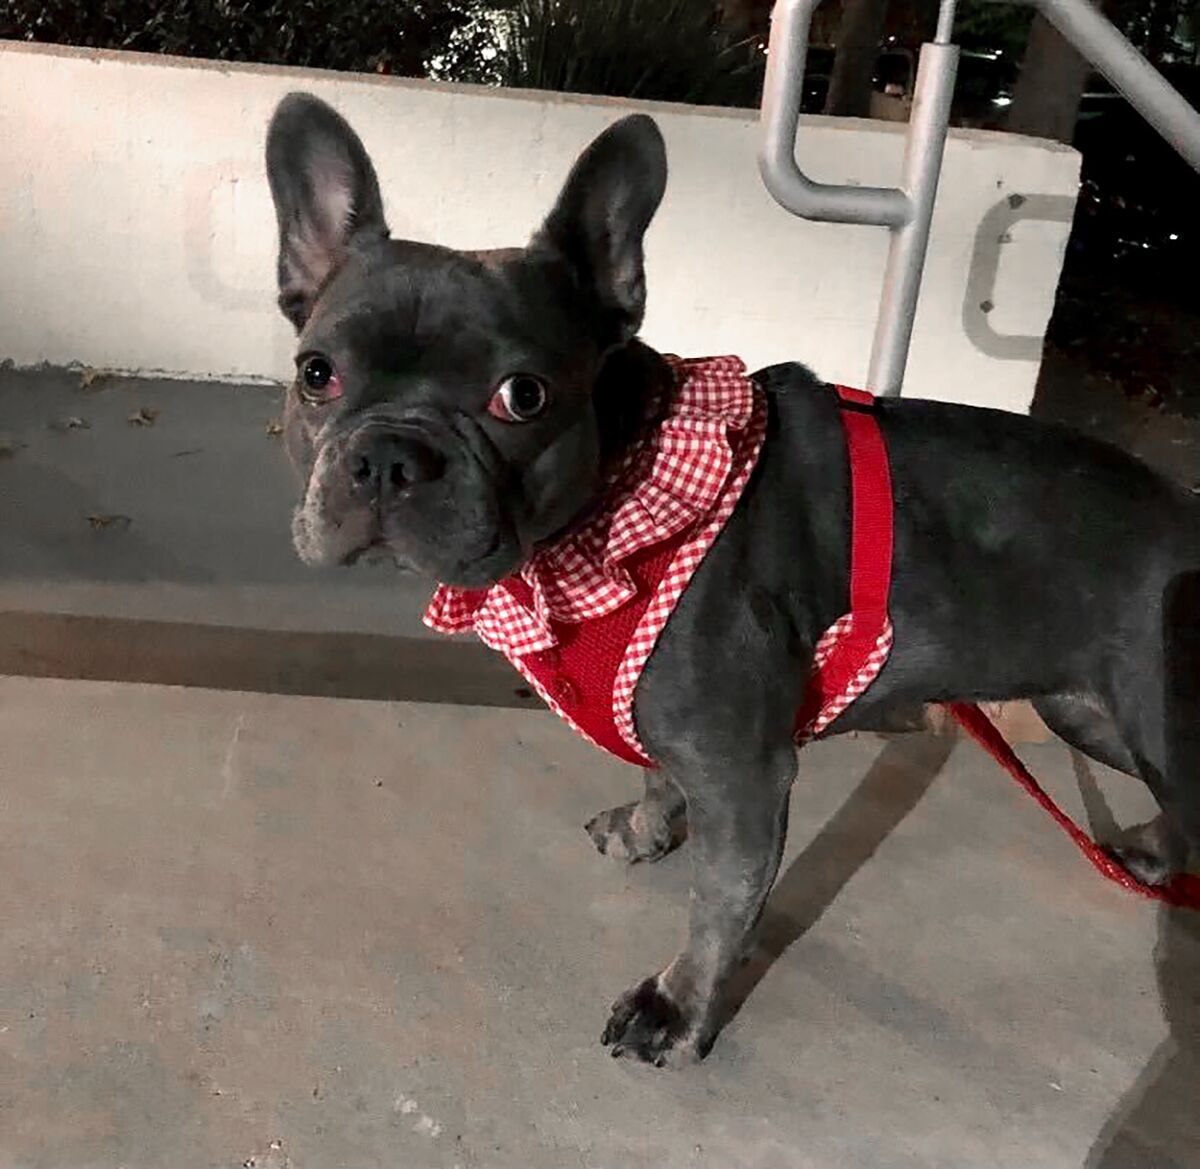 A French bulldog with blue-gray fur wears a harness made of red gingham fabric